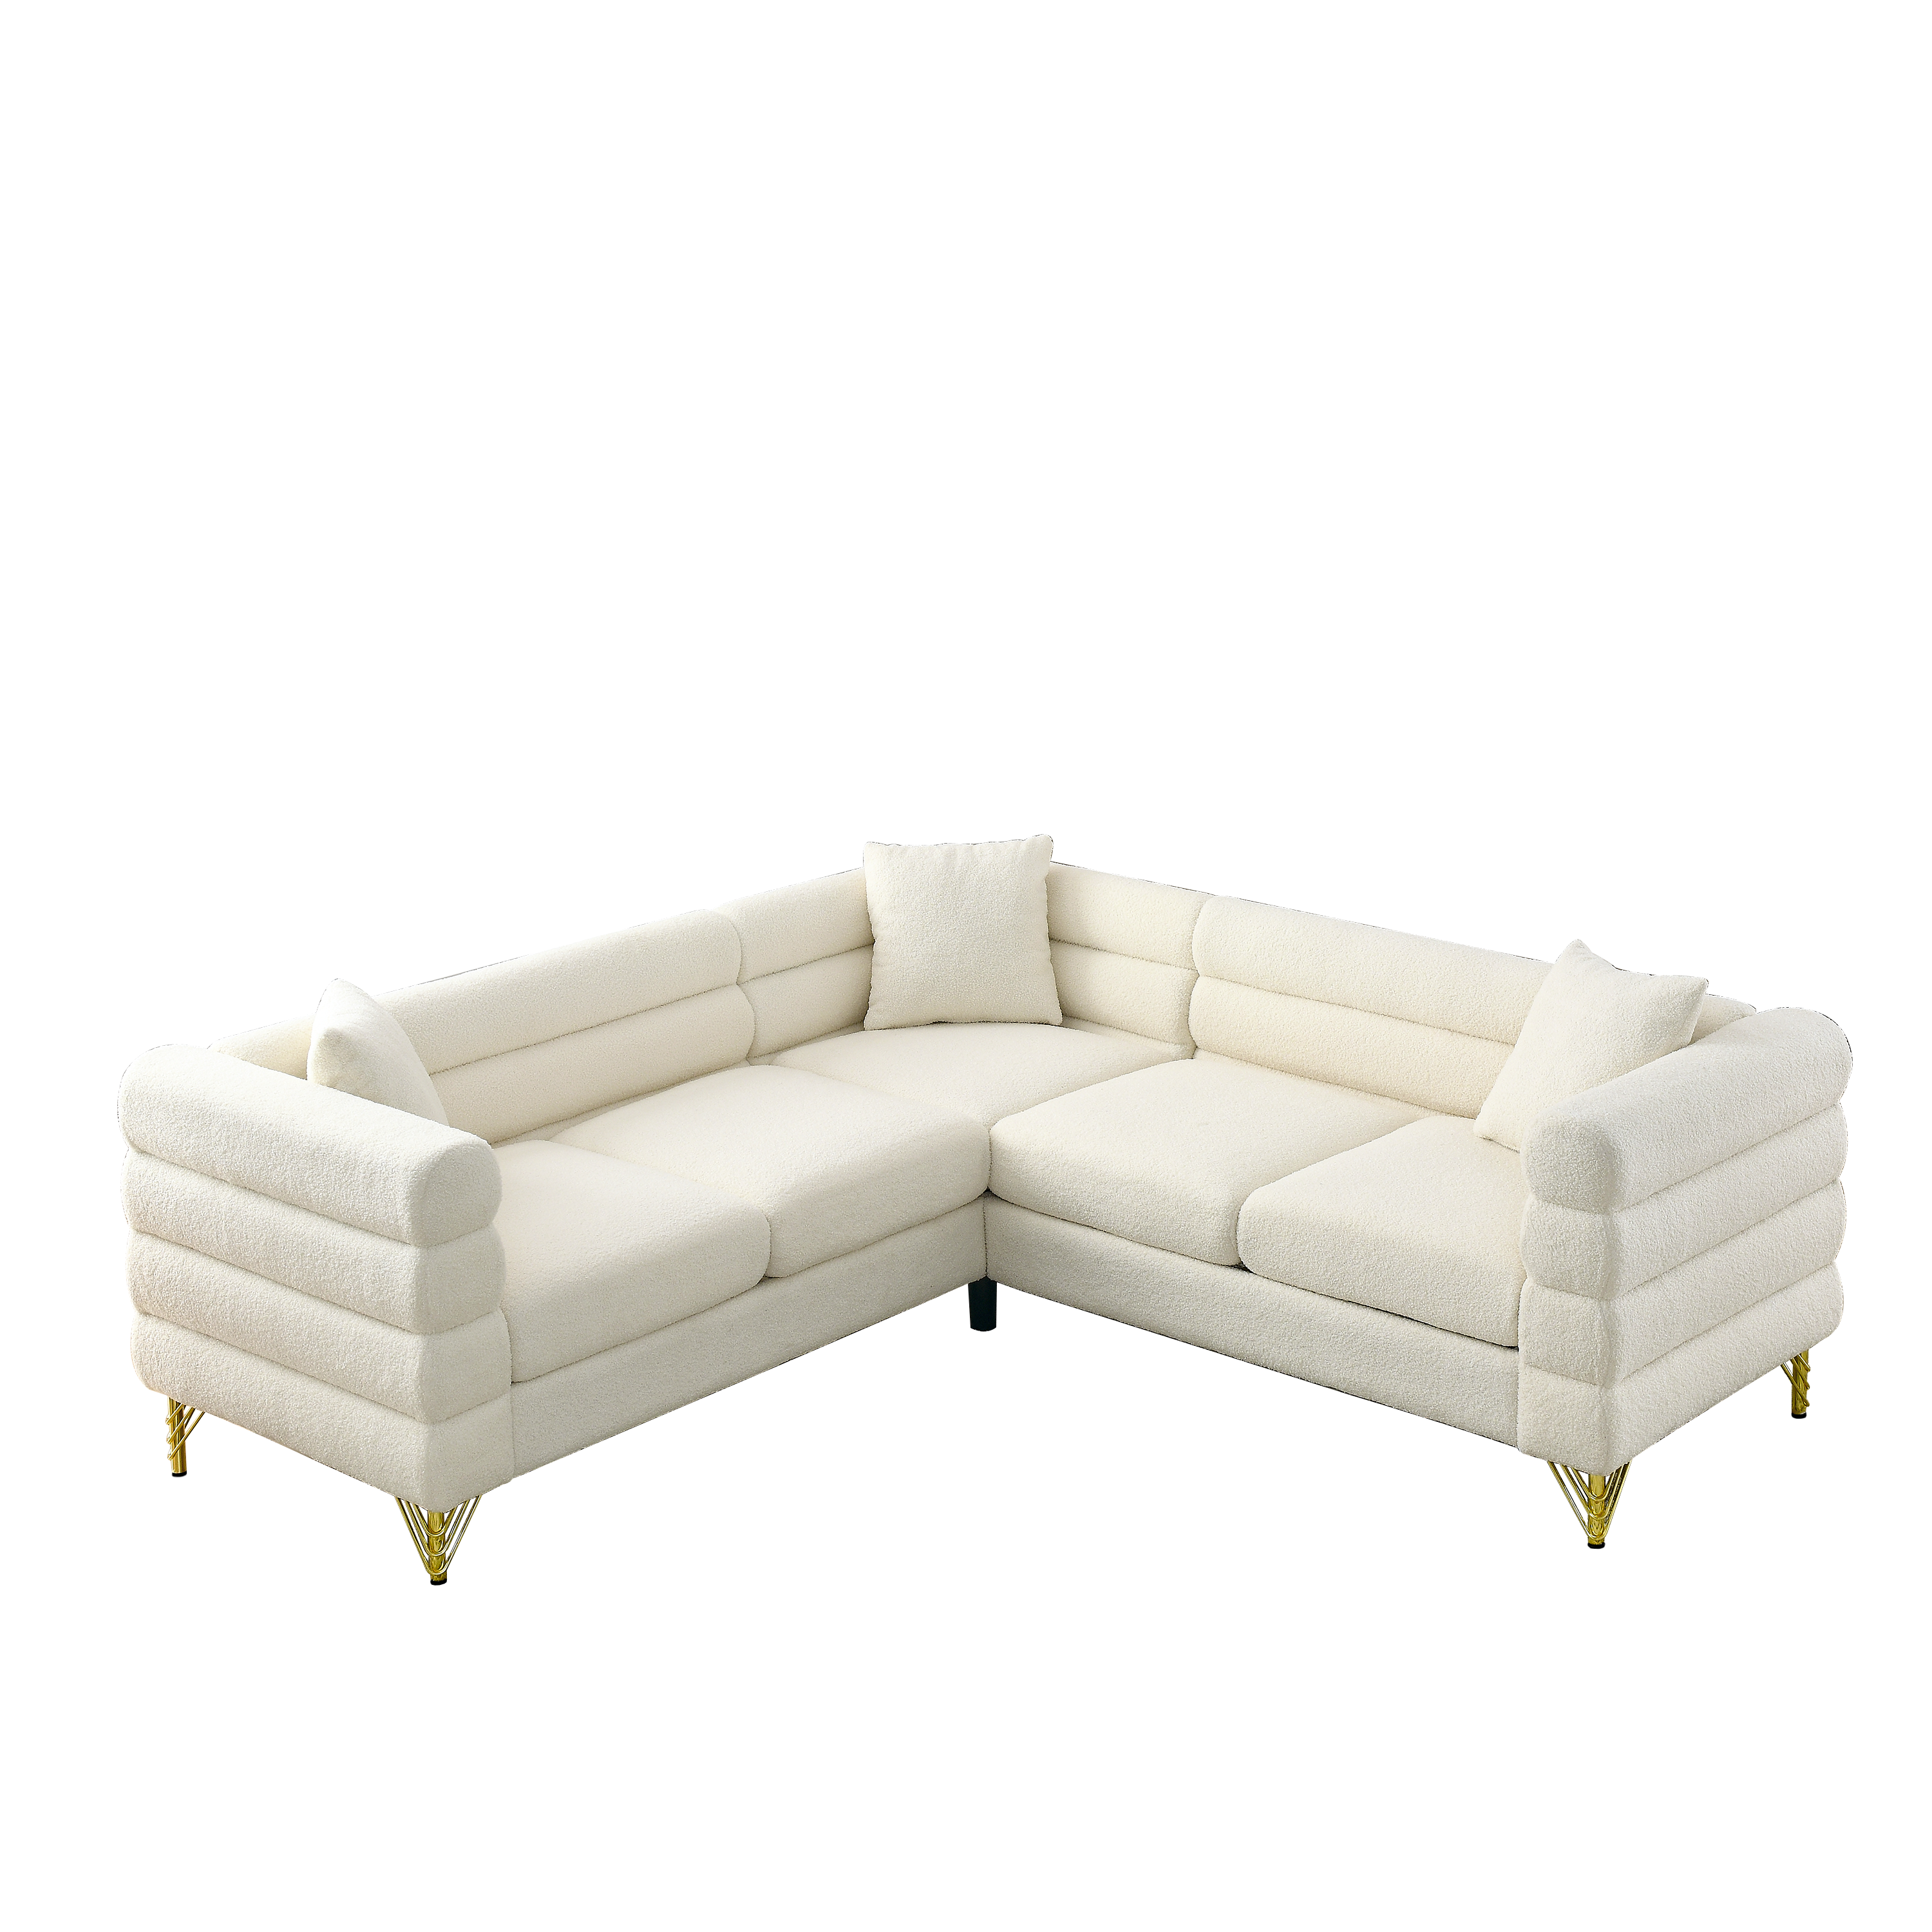 Lorenzi Beige Boucle Fabric Upholstered Sectional Sofa with Gold metal Legs